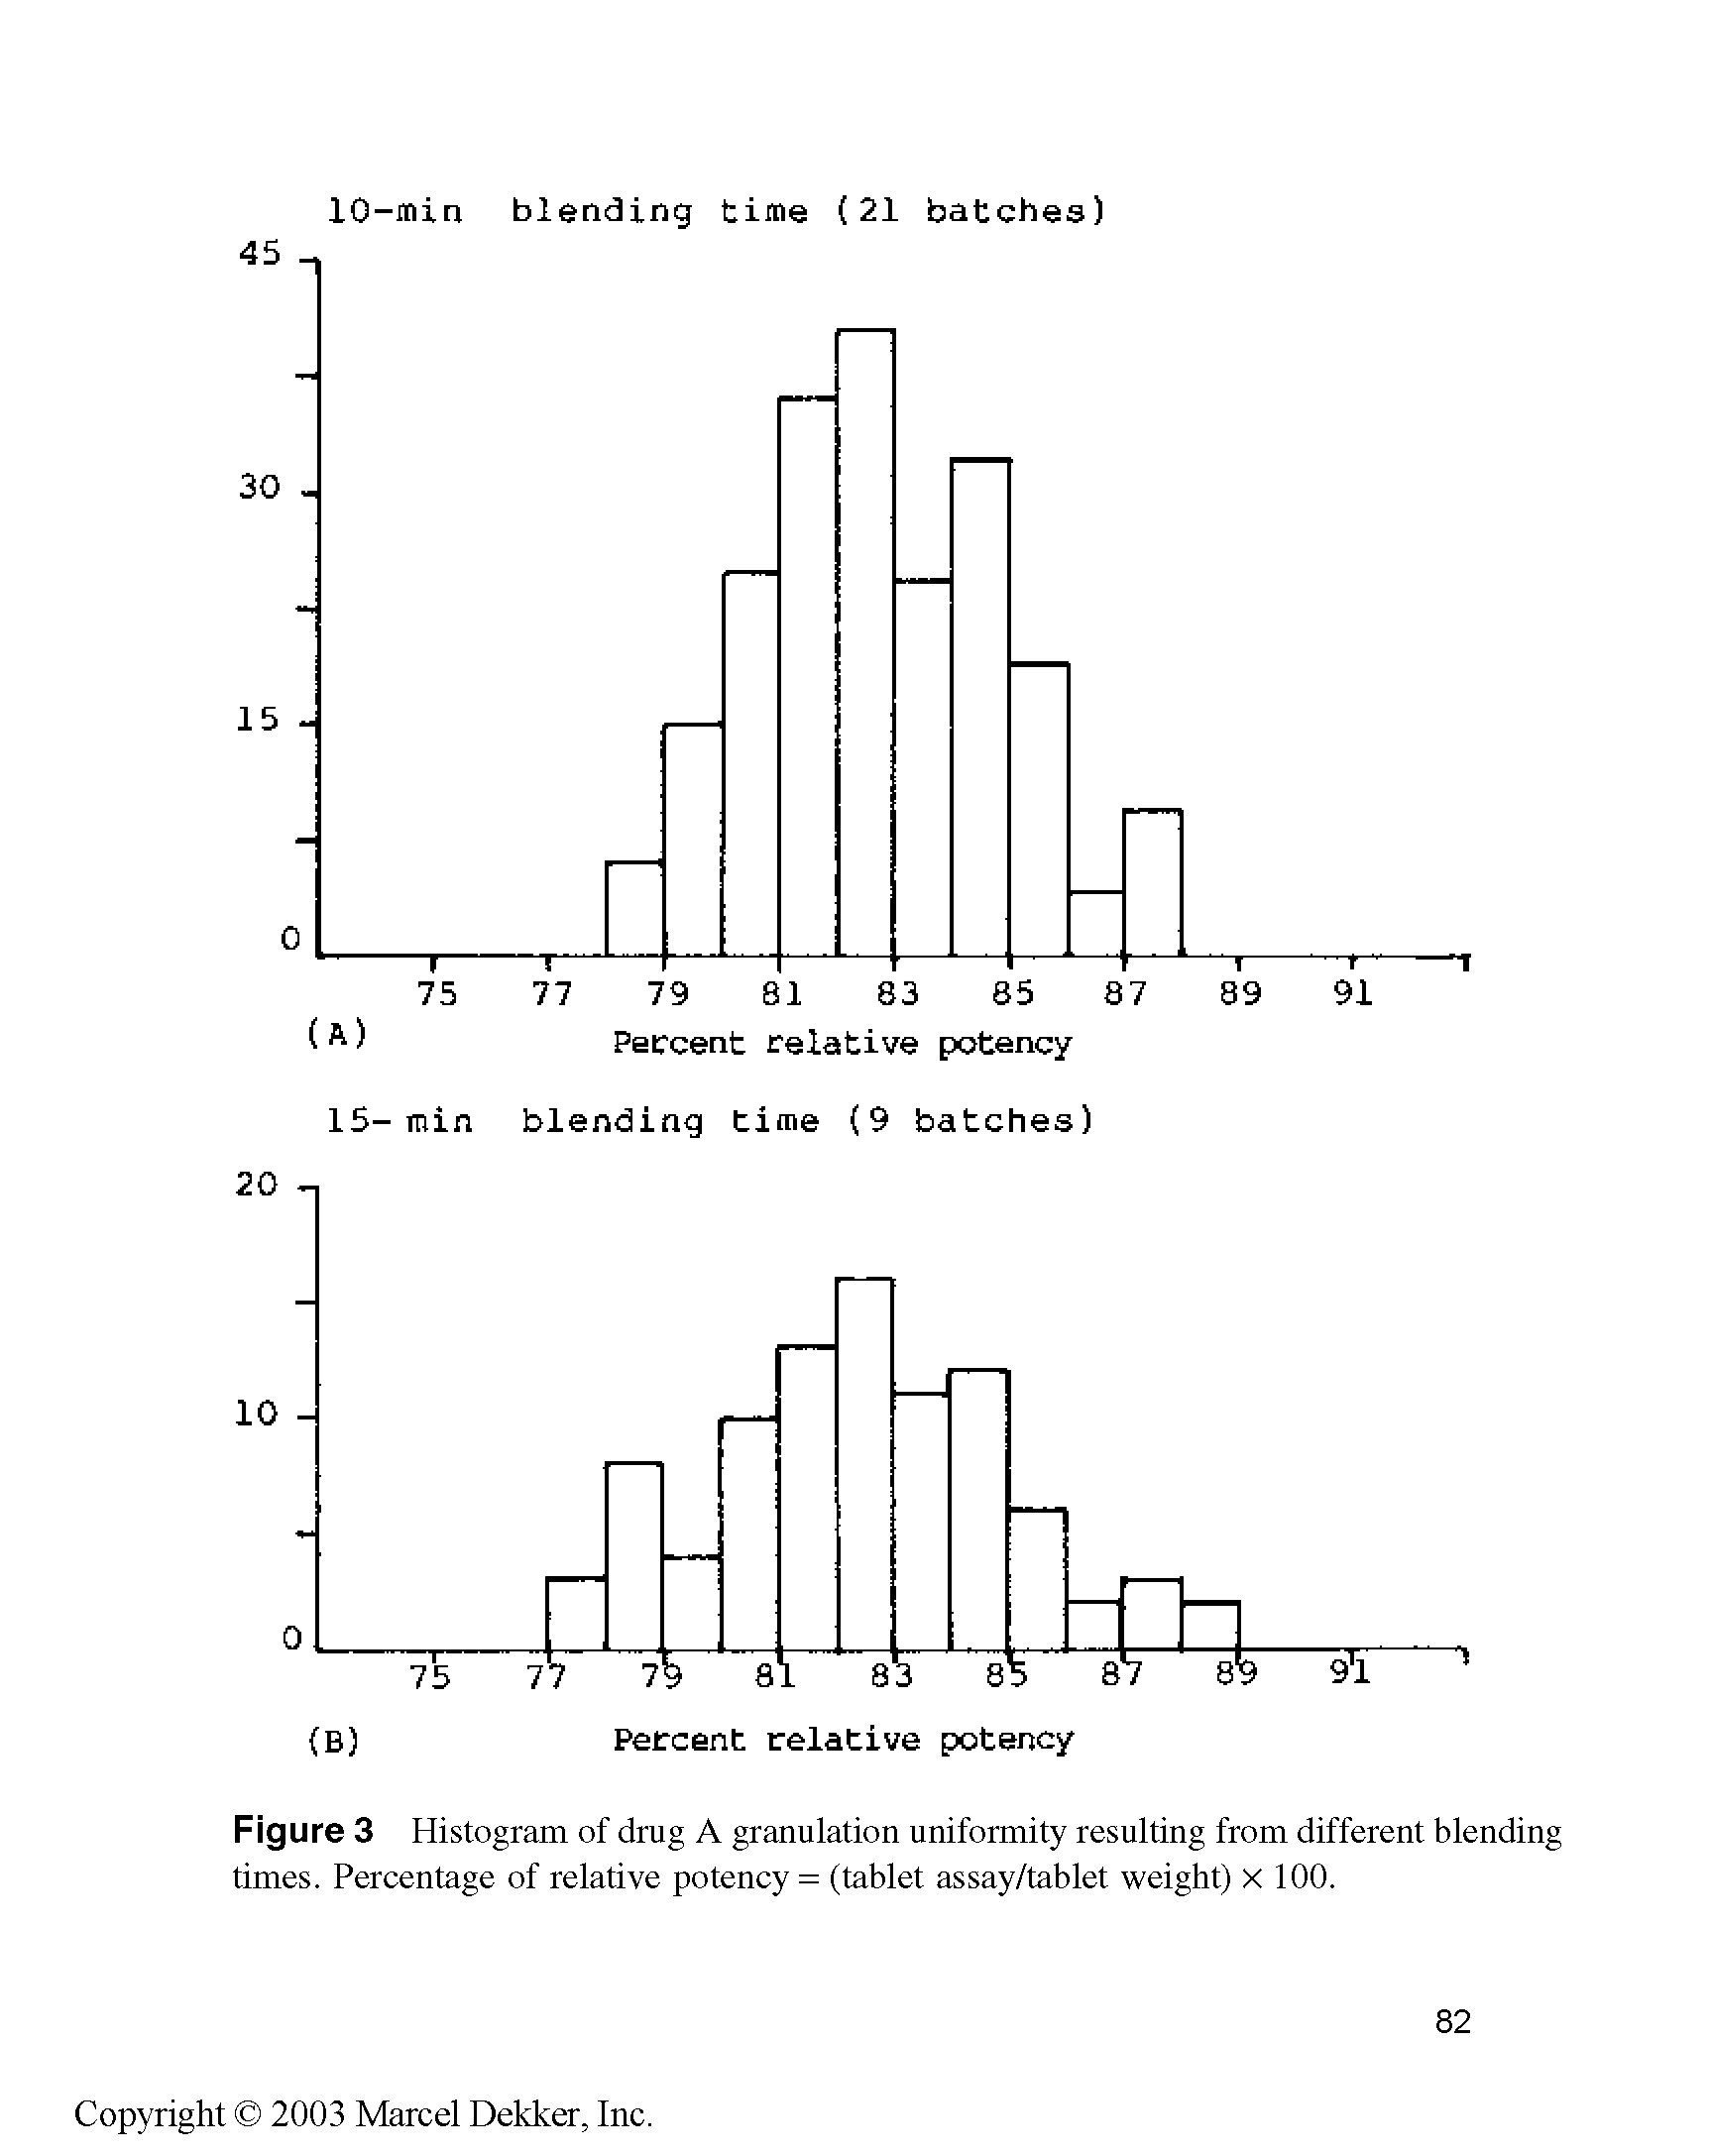 Figure 3 Histogram of drug A granulation uniformity resulting from different blending times. Percentage of relative potency = (tablet assay/tablet weight) X 100.